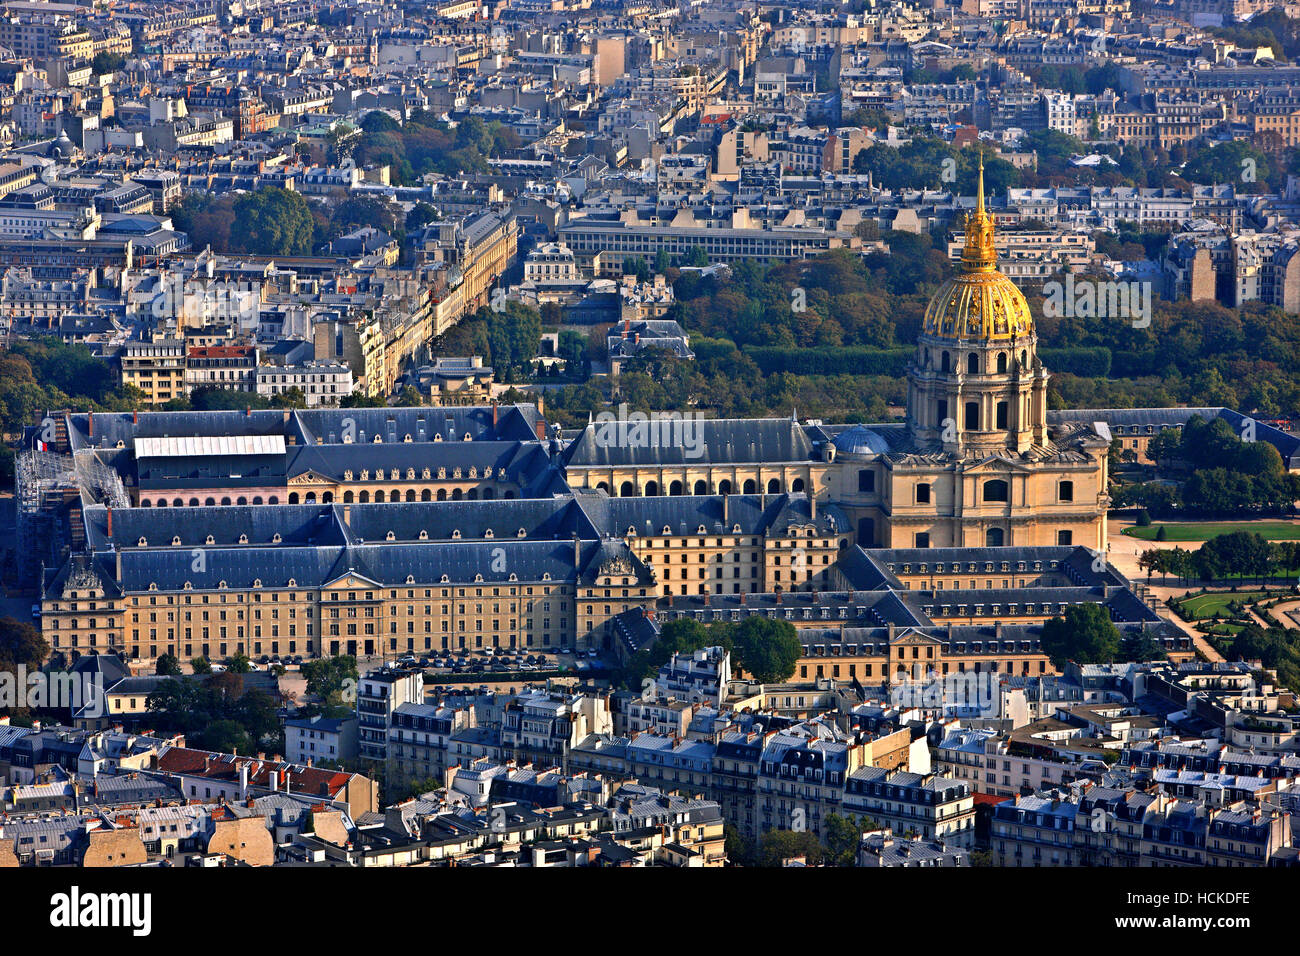 The Hôtel National des Invalides as seen from the top of the Eiffel Tower, Paris, France Stock Photo